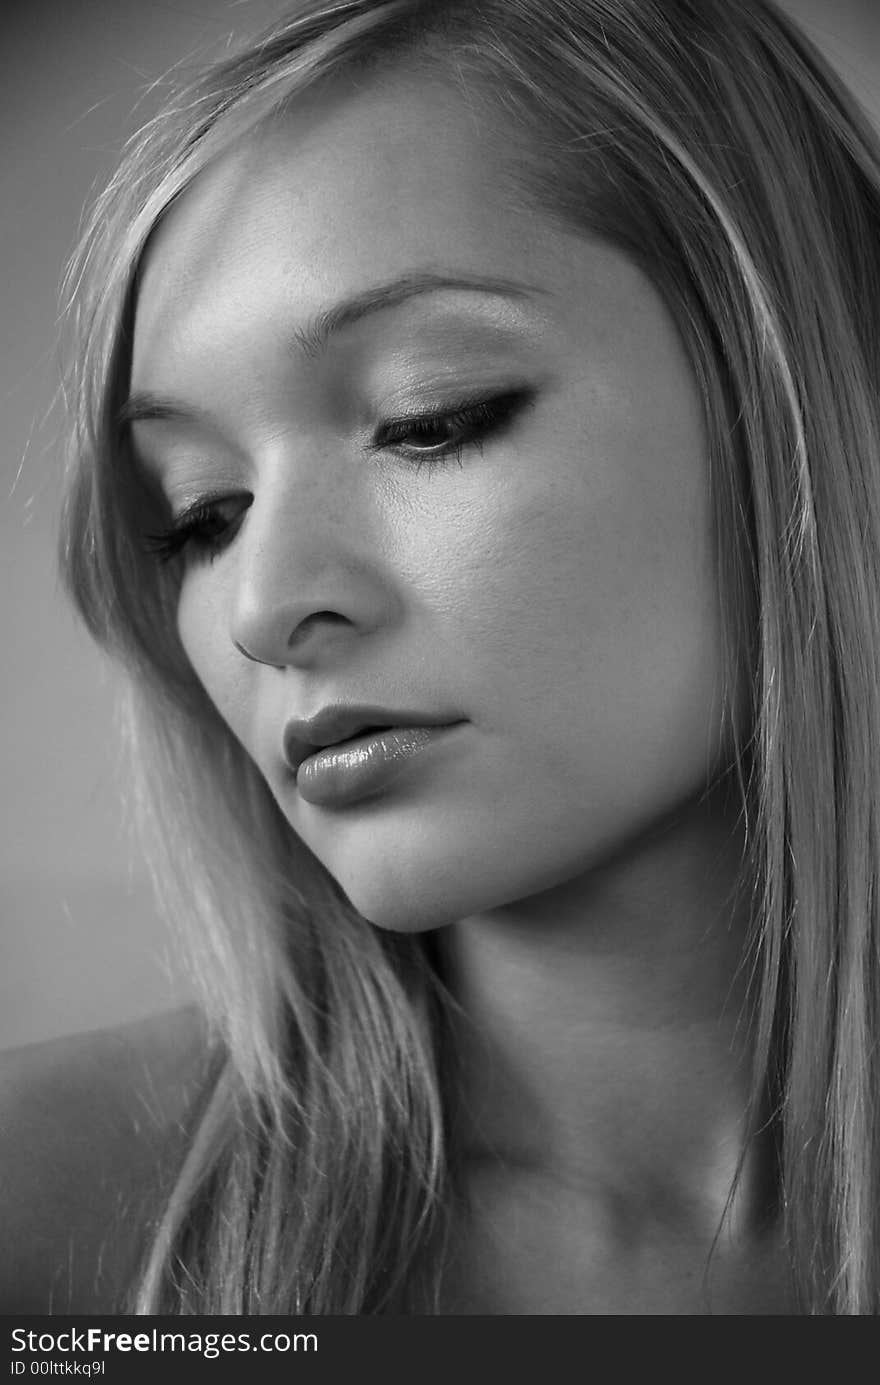 Black and white portrait of stunning young woman. Black and white portrait of stunning young woman.